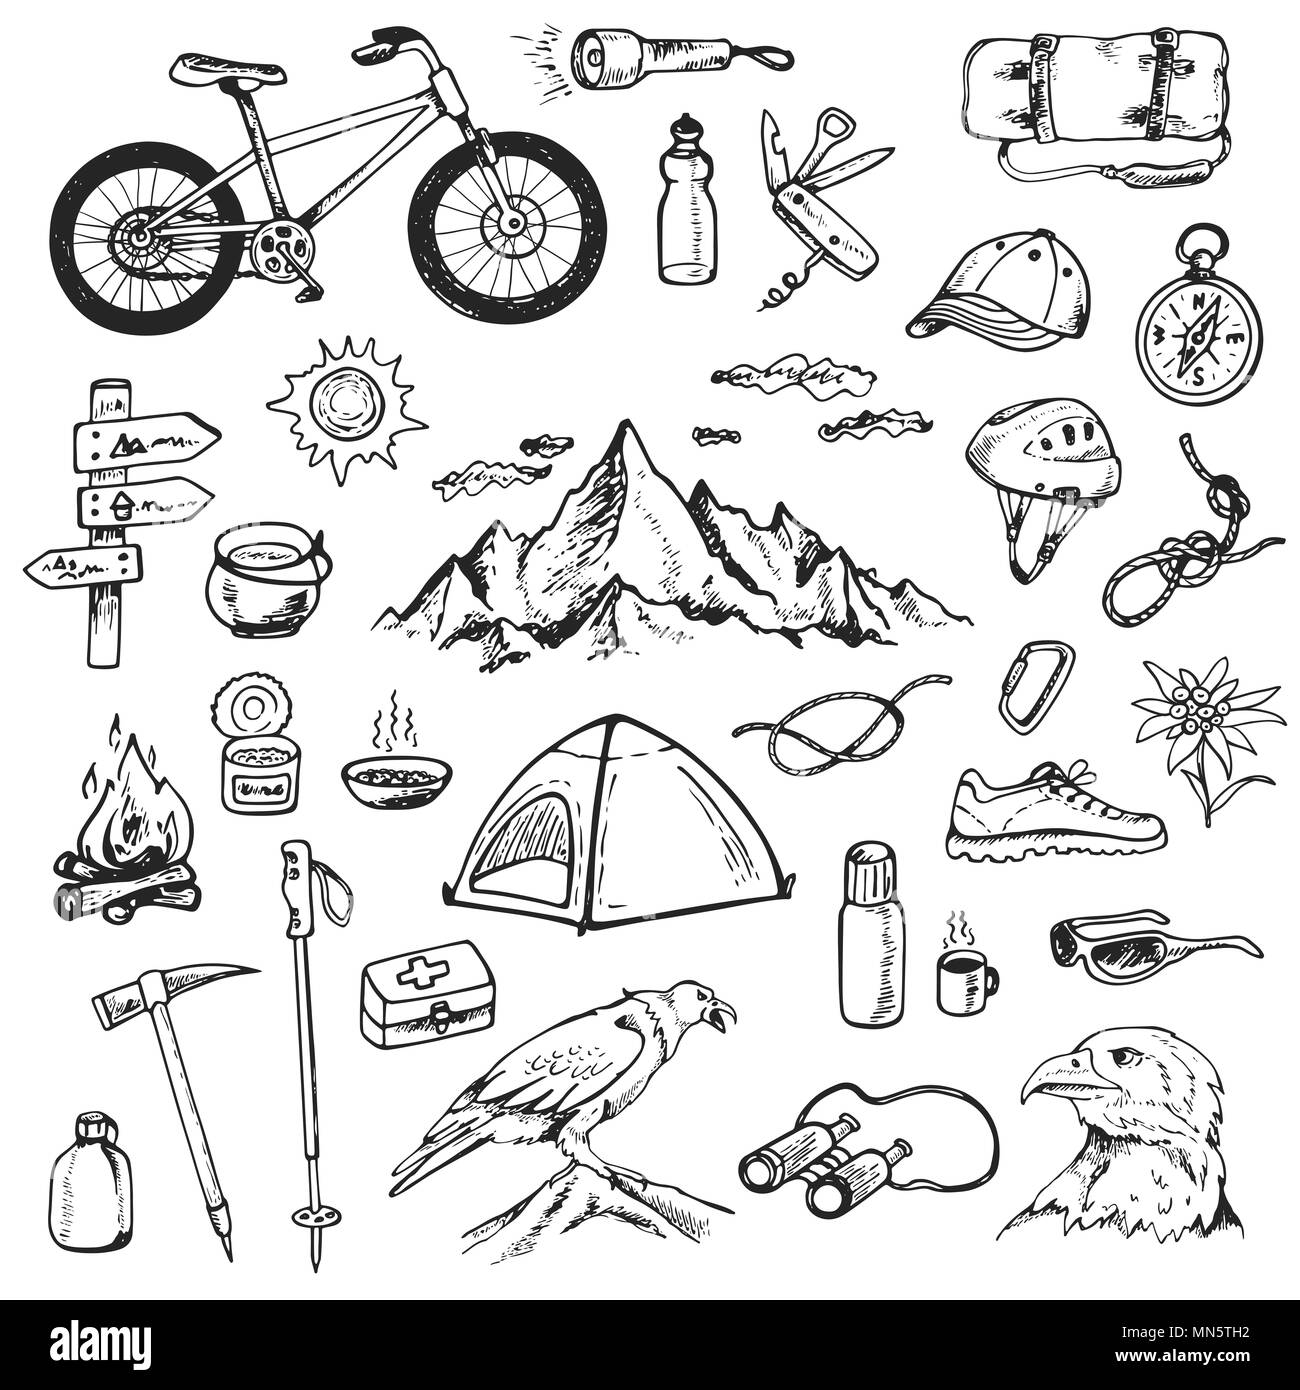 Set of doodle mountain camping design elements. Hand drawn  illustrations isolated on a white background. Stock Photo